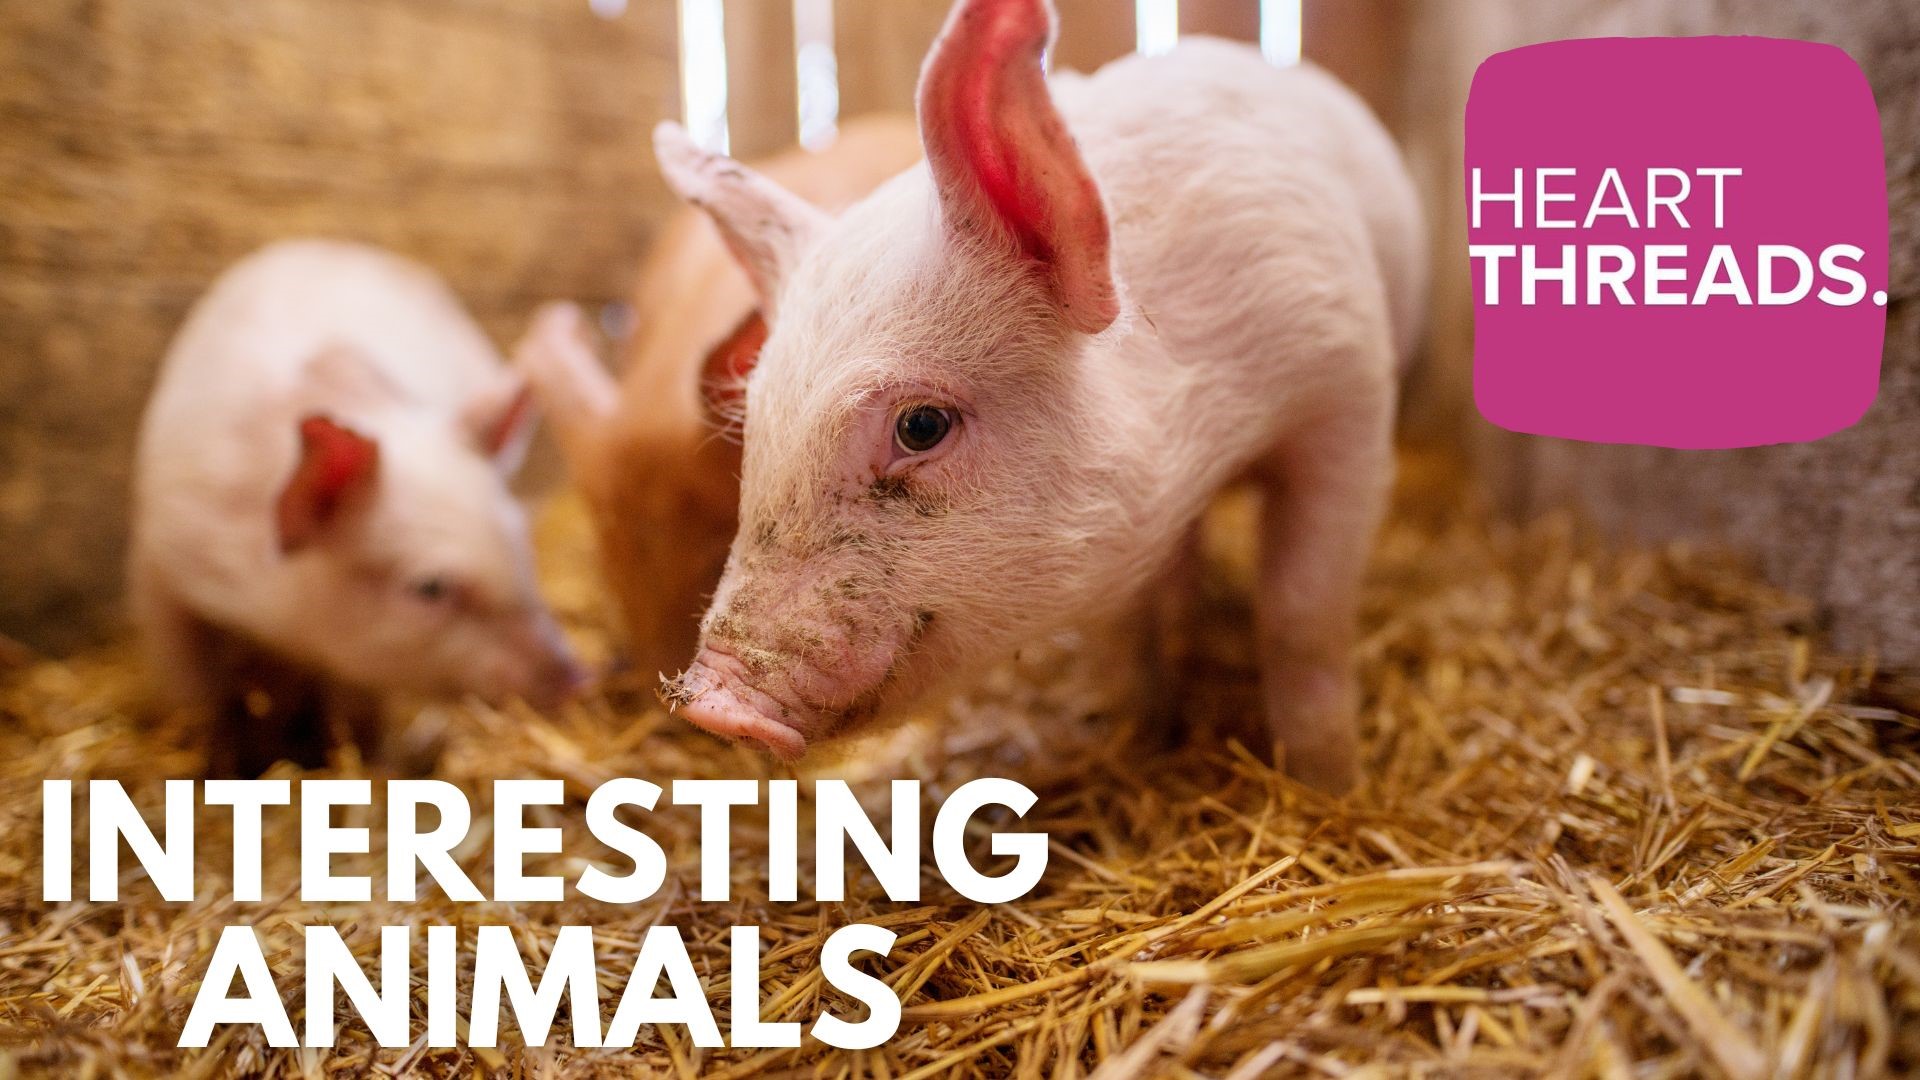 Animals are an important part of our lives, even the ones you might not think of. Here are some enlightening stories of pigs, salamanders, cows and more.